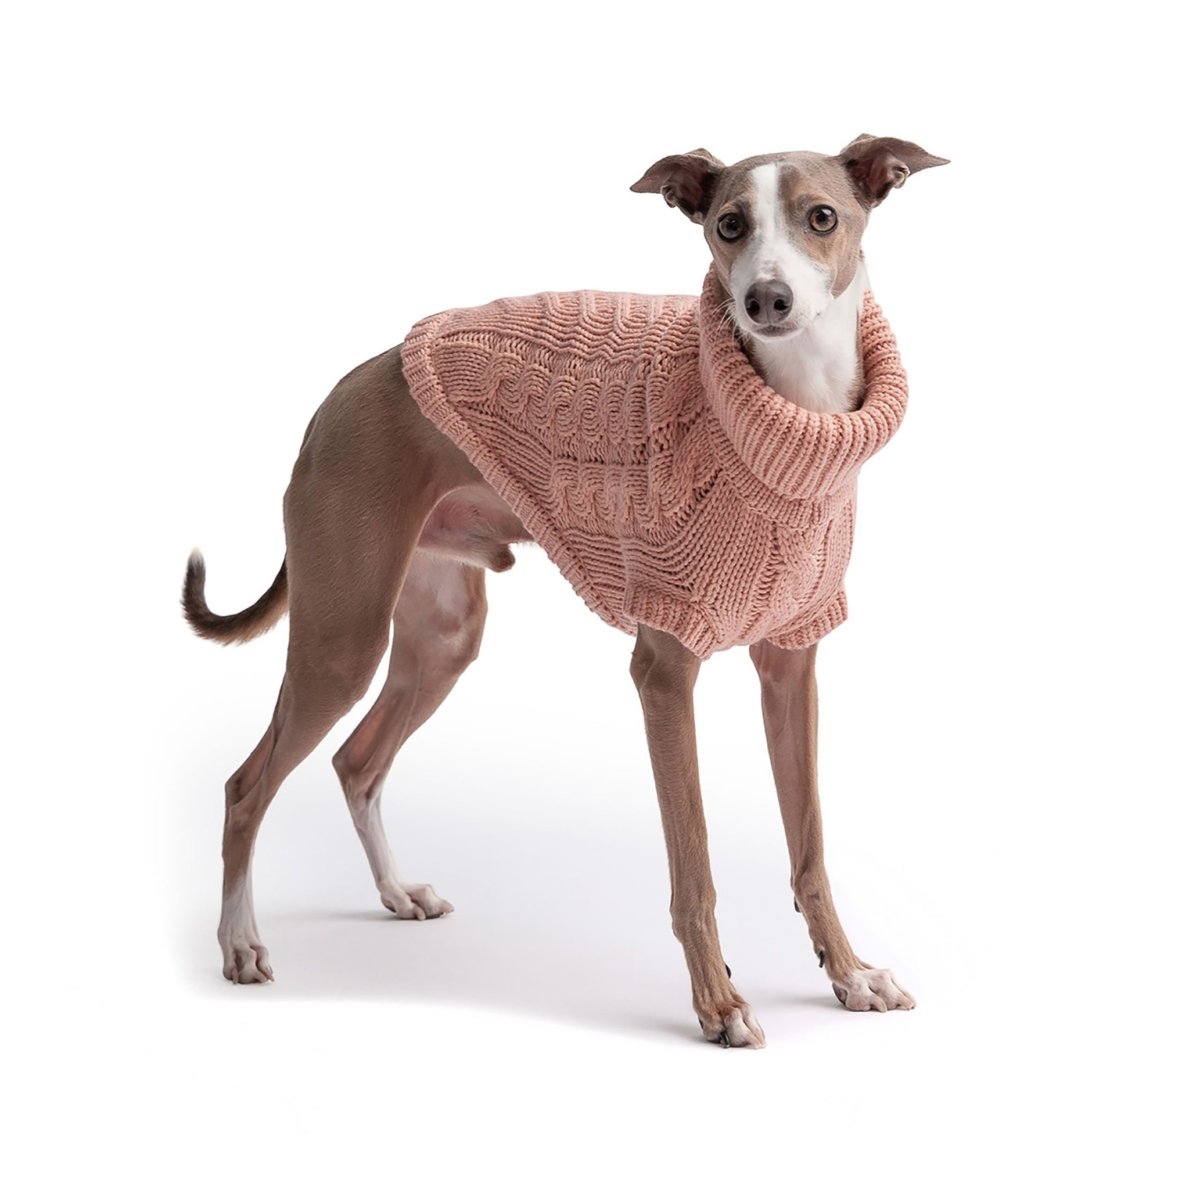 Snuggly Chalet Pet Sweater - Funny Nikko